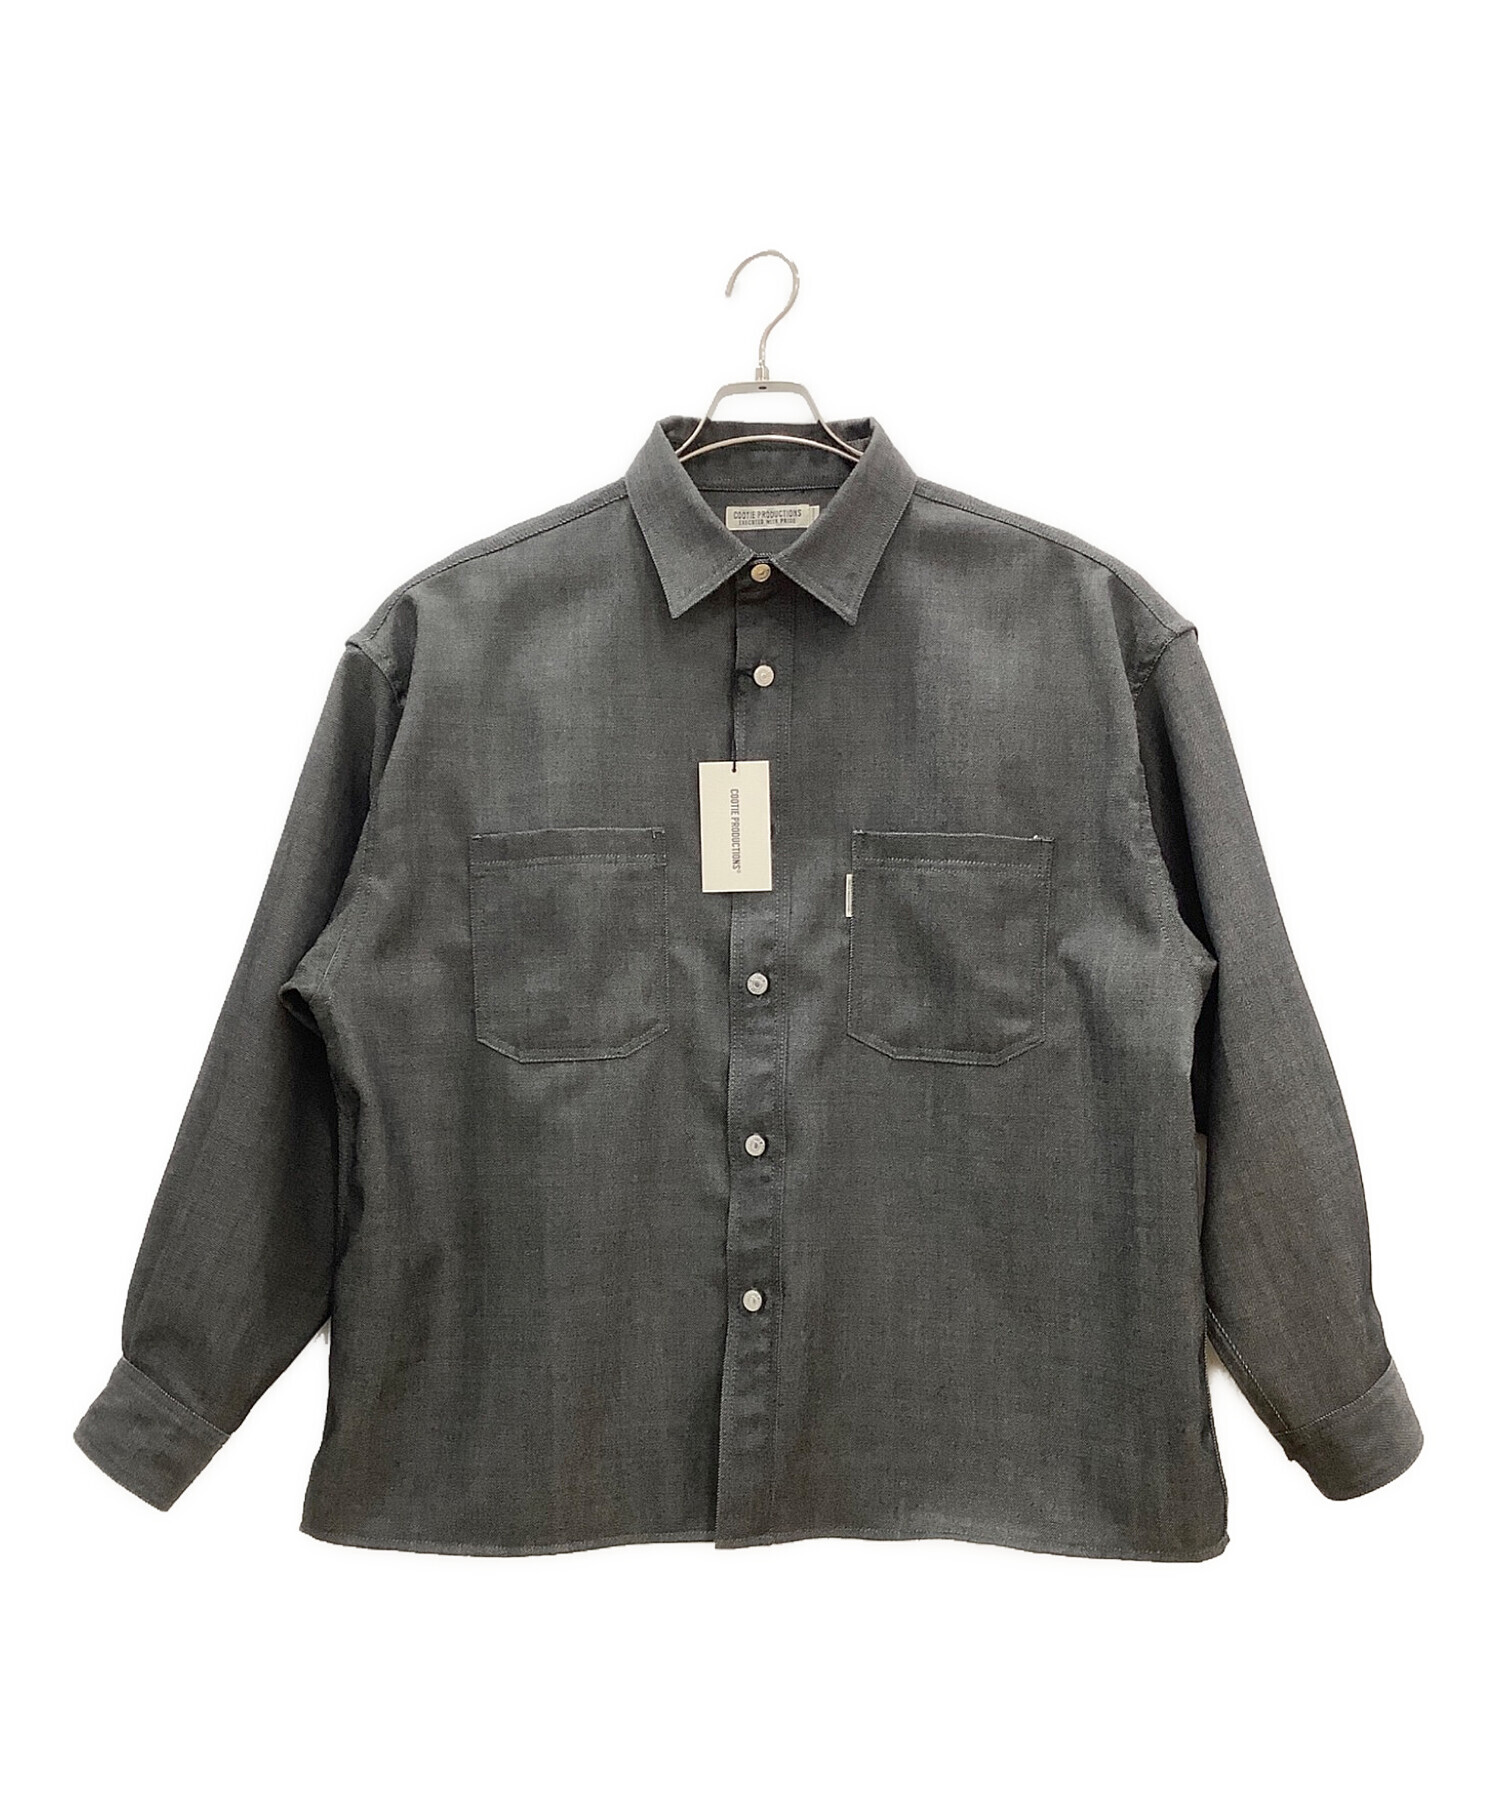 COOTIE PRODUCTIONS (クーティープロダクツ) Wool Work L/S Shirt COOTIE PRODUCTIONS タグ付き  ブラック サイズ:M 未使用品